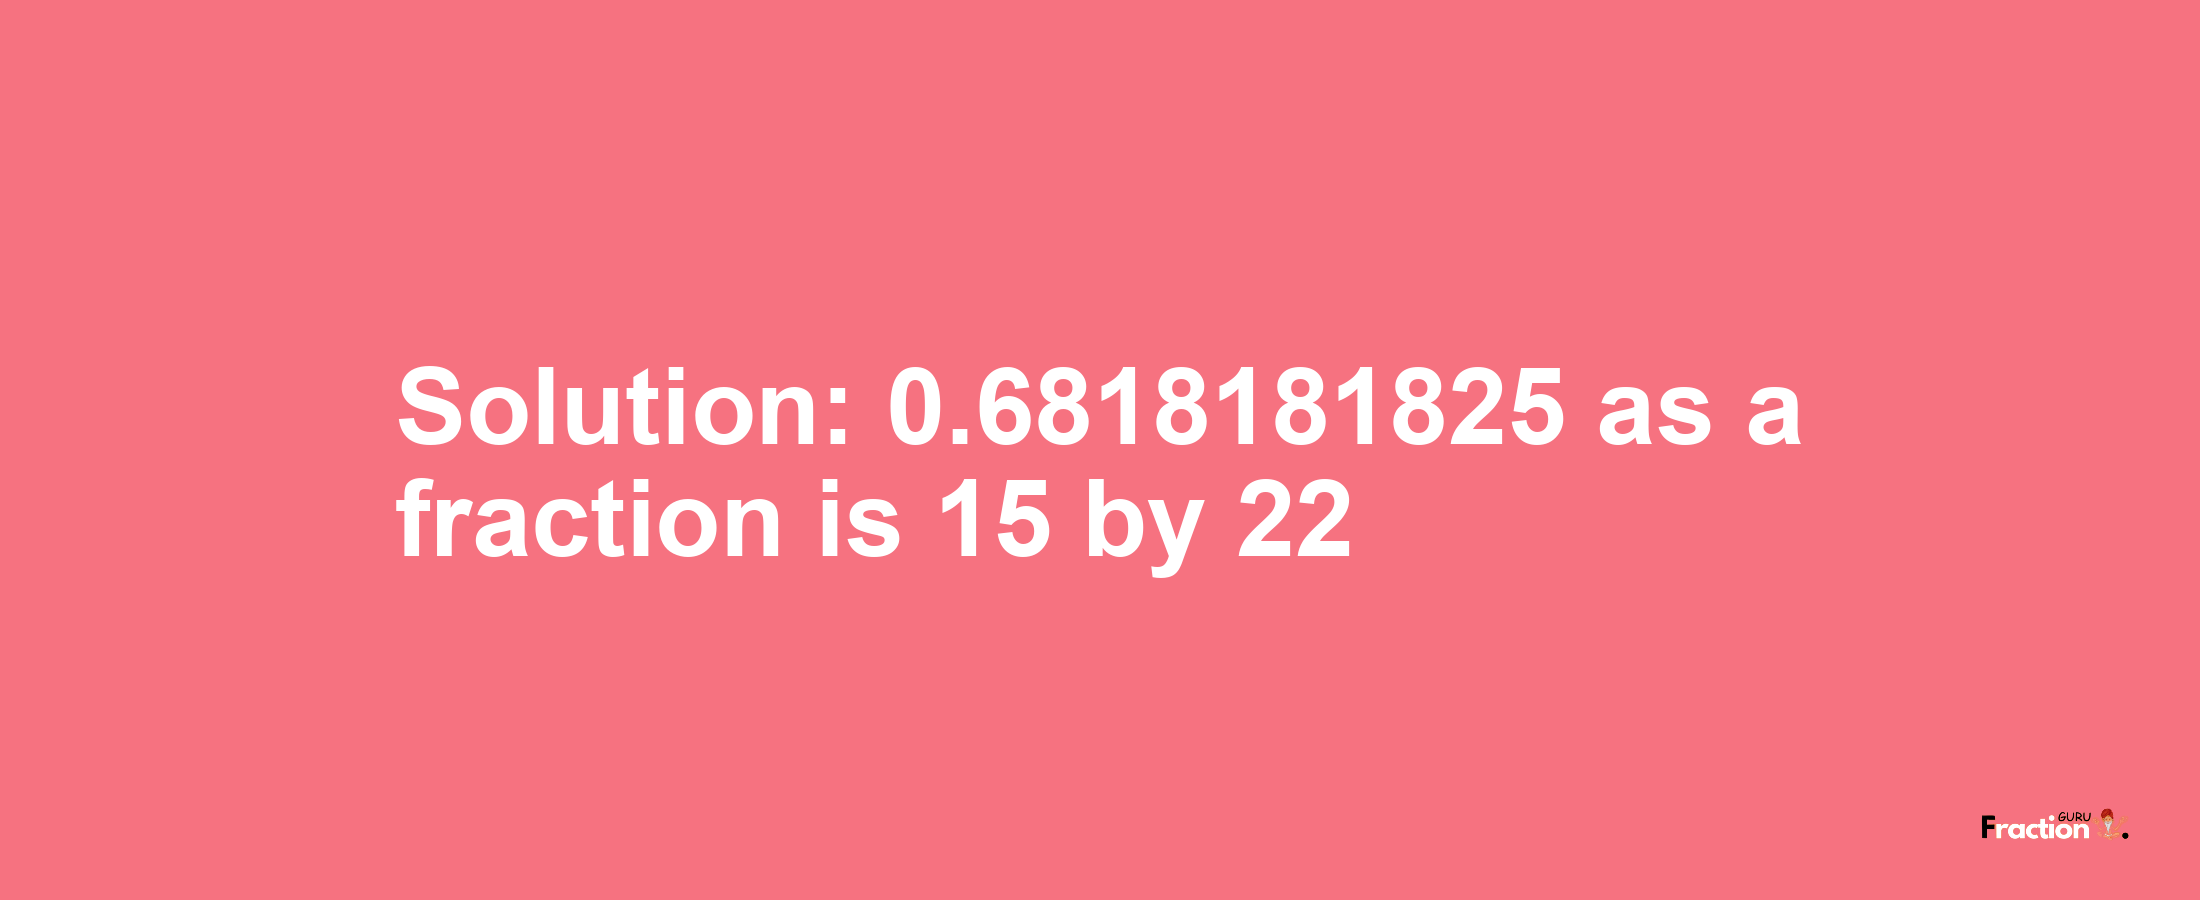 Solution:0.6818181825 as a fraction is 15/22